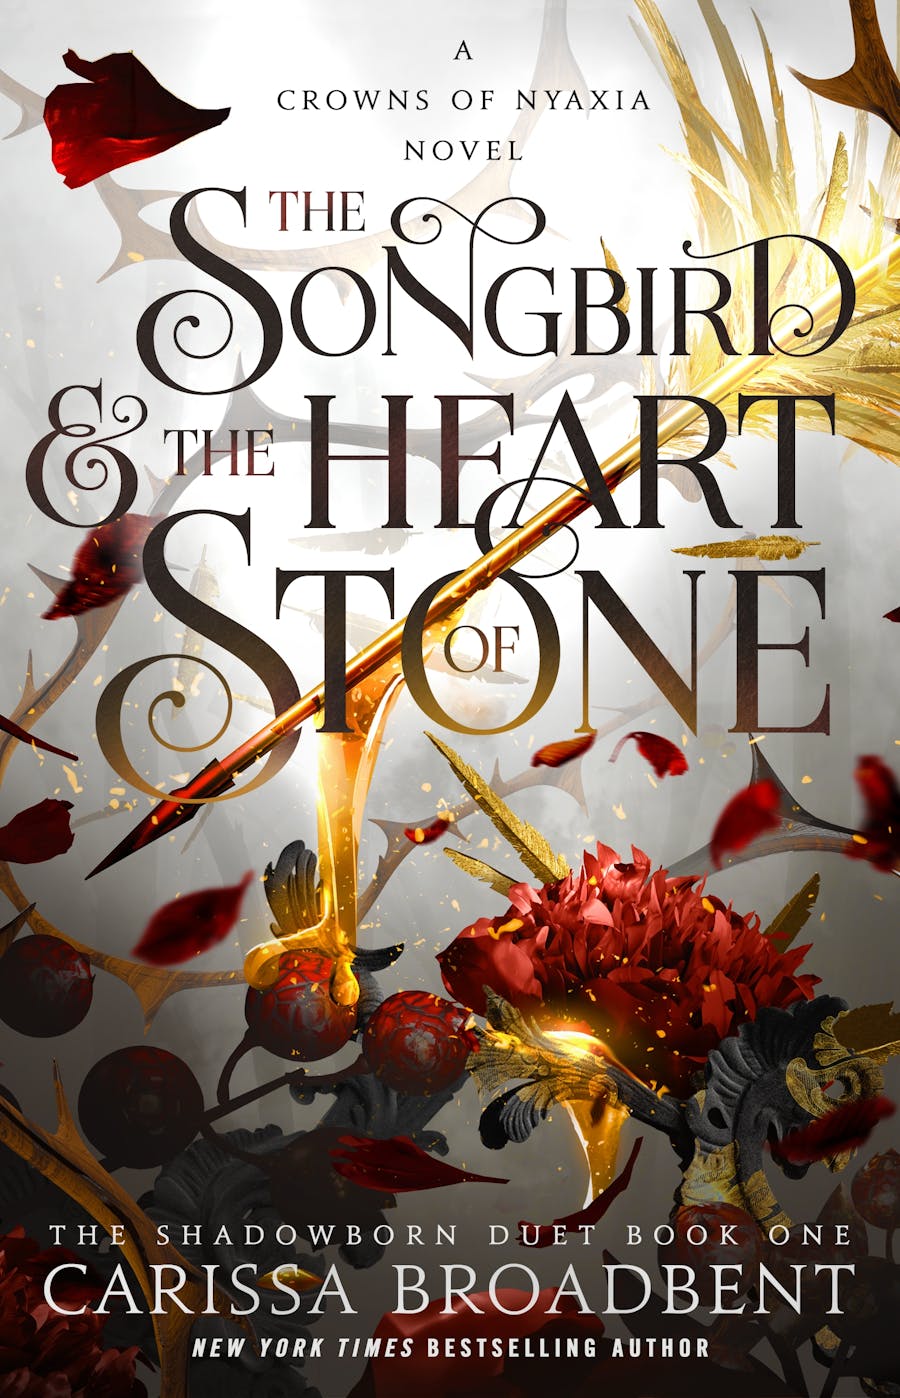 The Songbird and the Heart of Stone: The Shadowborn Duet, Book 1 (Crowns of Nyaxia #3)